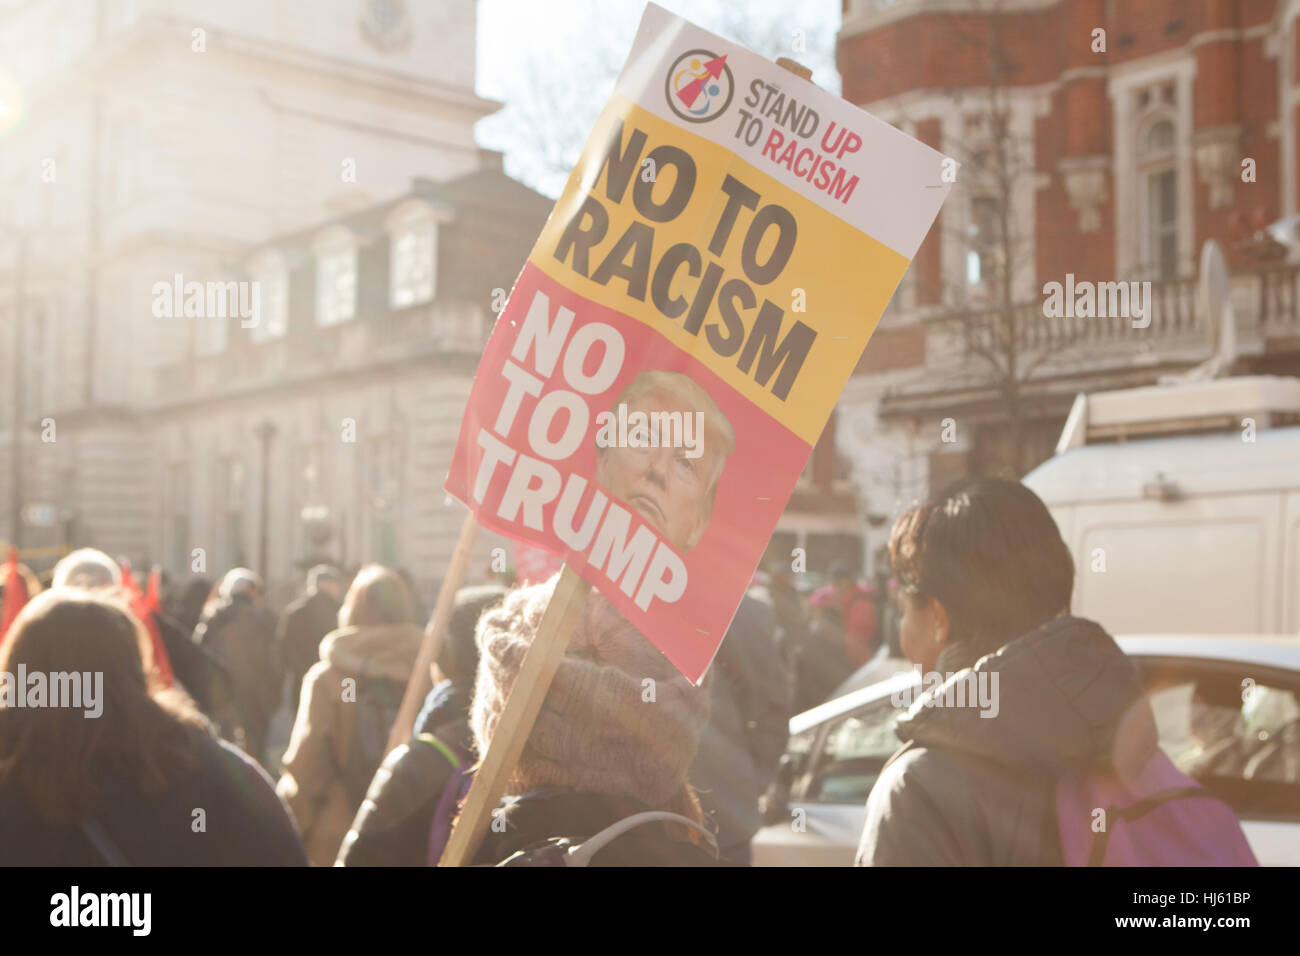 London, UK. 21st January, 2017. Protestors on Women's March marching through streets of London holding anti racist placard. Credit: Alan Gignoux/Alamy Live News Stock Photo